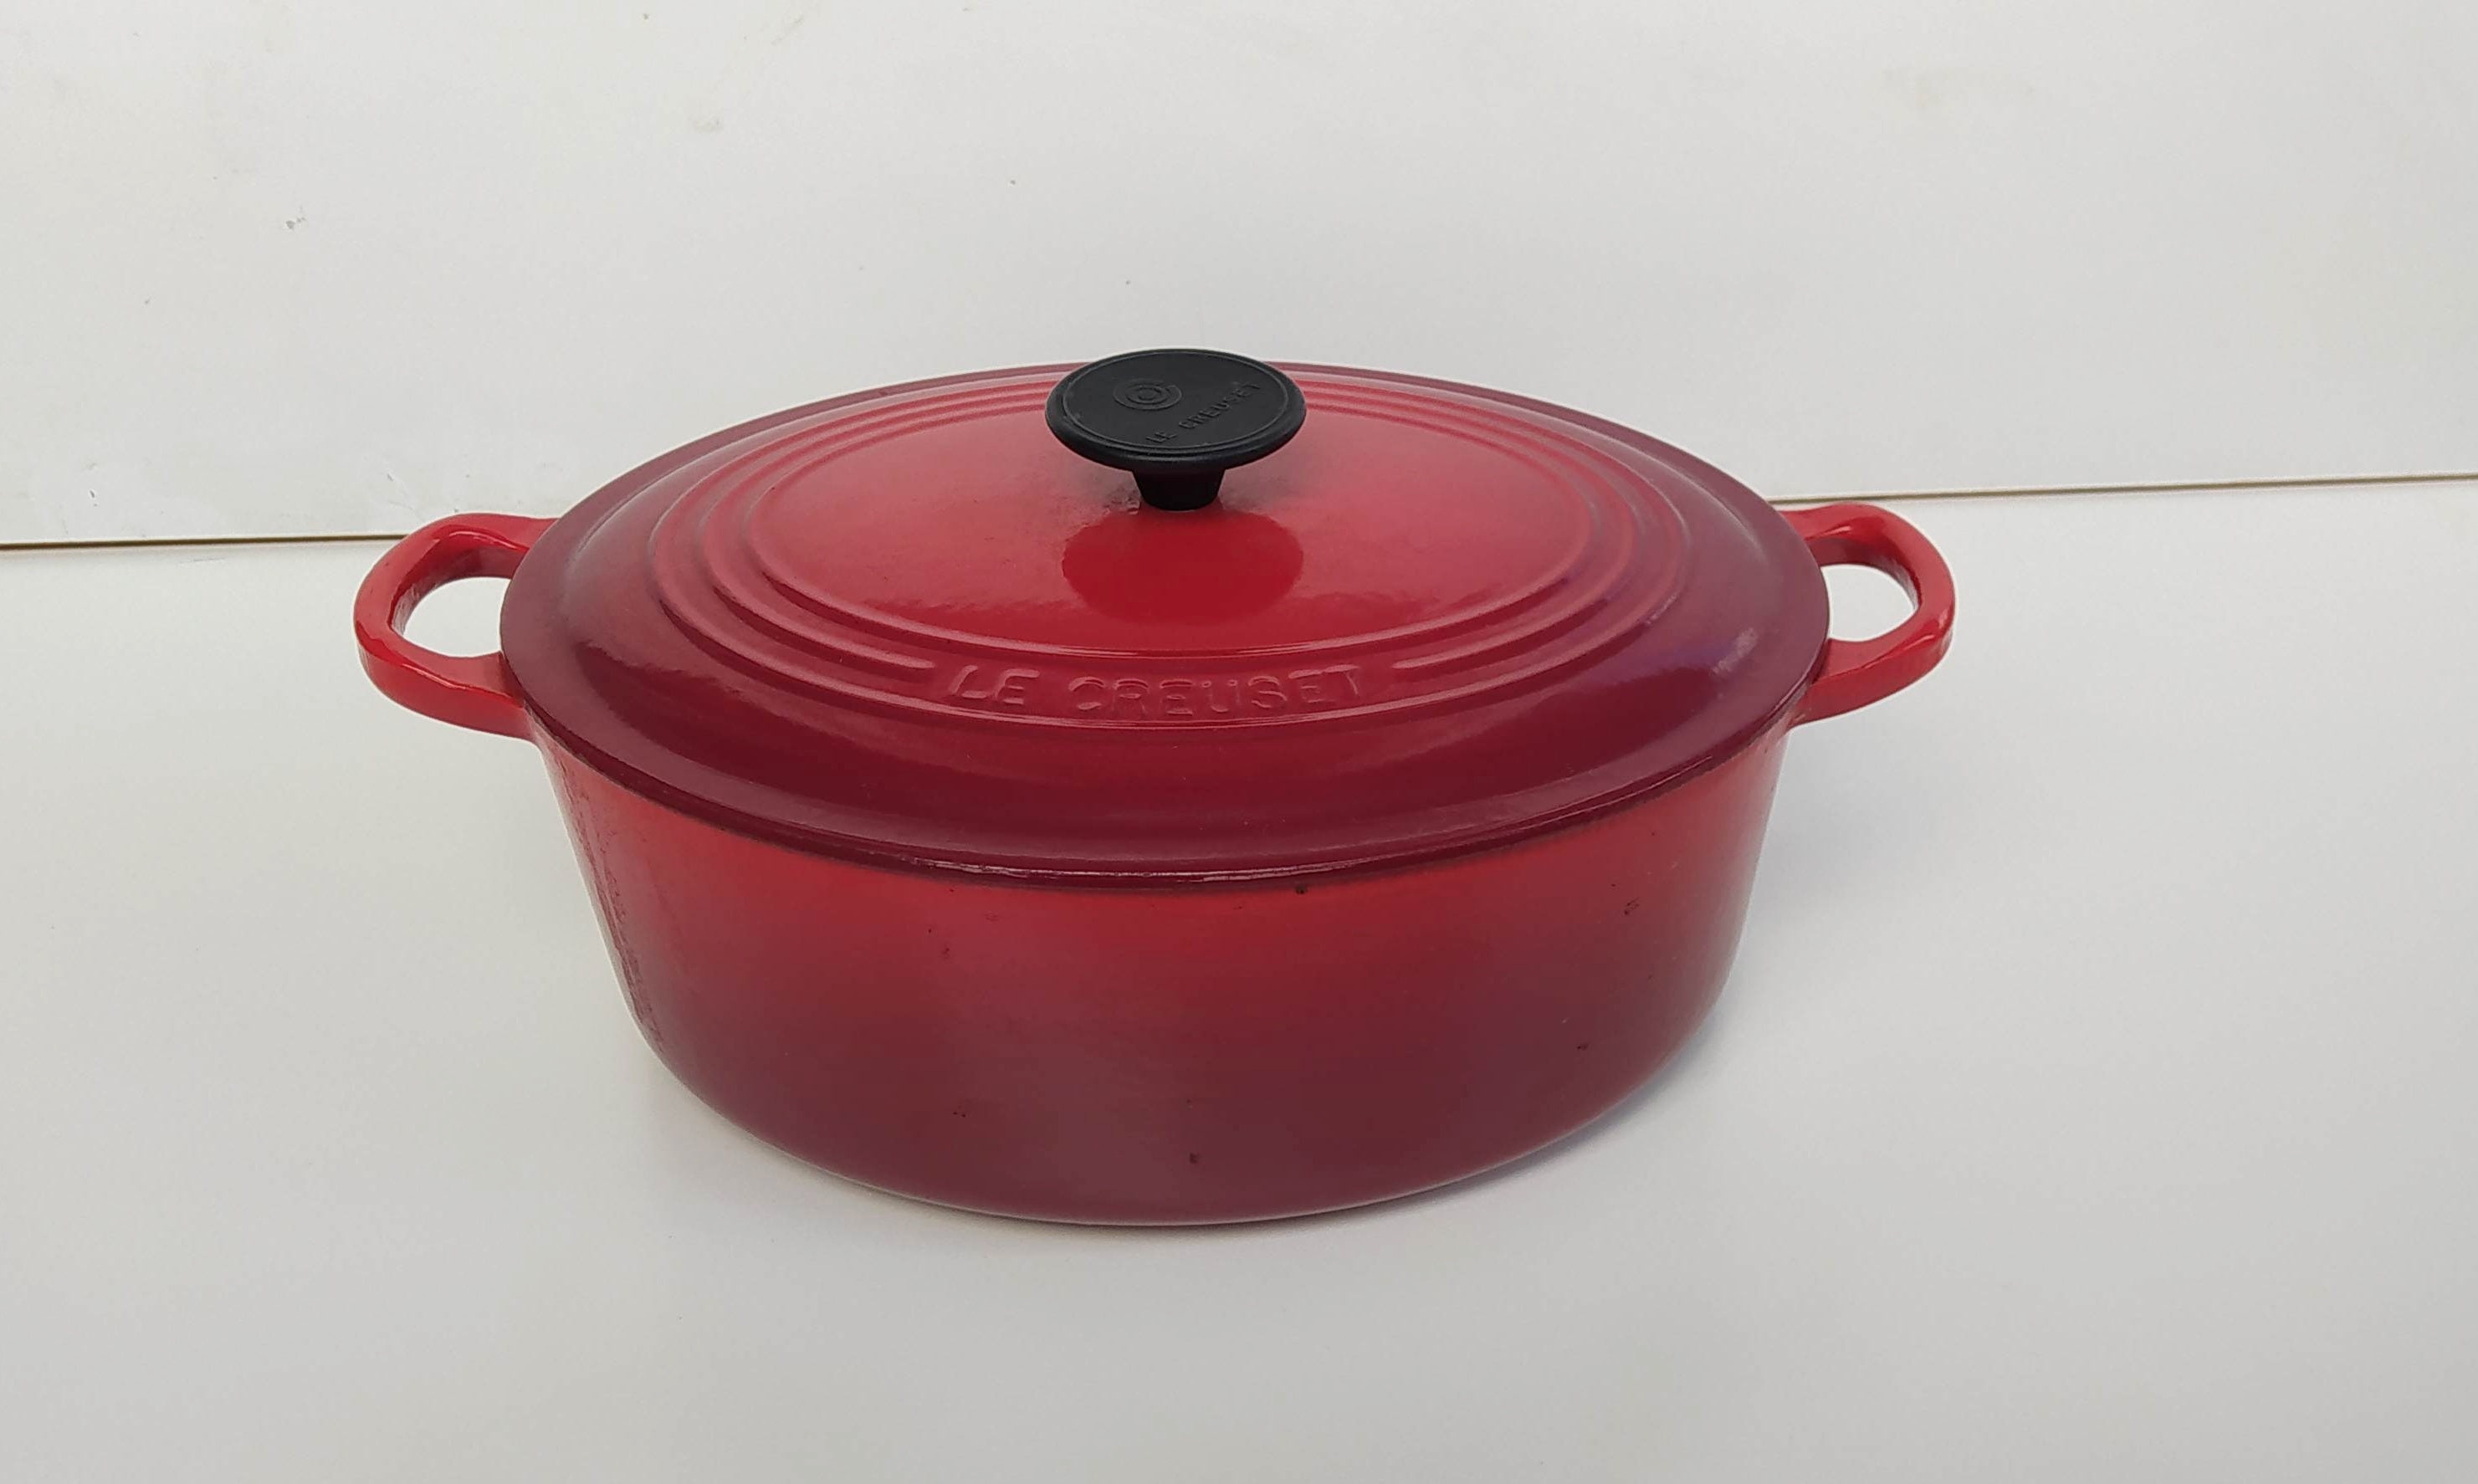 fejl Drejning Kriminel Cocotte Le Creuset in Oval Red Enamelled Cast Iron With Lid - Etsy